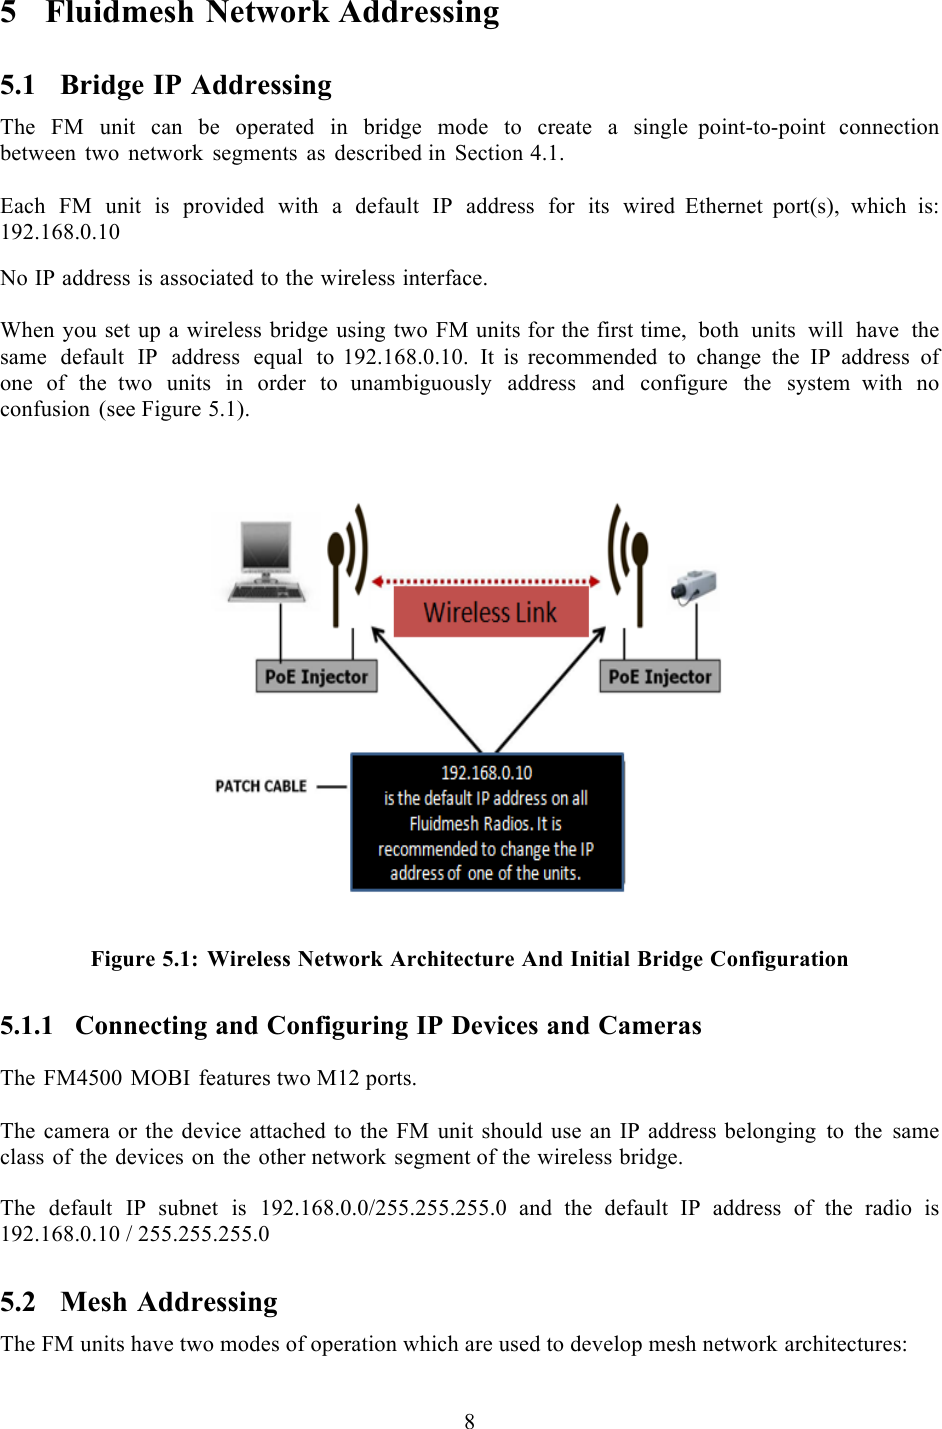  8  5 Fluidmesh Network Addressing 5.1 Bridge IP Addressing The FM unit can be operated in bridge mode to create  a  single point-to-point connection between two network segments as described in Section 4.1.  Each FM unit is provided with a default IP address for its wired  Ethernet  port(s), which is:  192.168.0.10  No IP address is associated to the wireless interface.  When you set up a wireless bridge using two FM units for the first time, both units will have the same default IP address equal to 192.168.0.10. It is recommended to change the IP address of one of the  two units in order to unambiguously address and configure the system  with no confusion (see Figure 5.1).     Figure 5.1: Wireless Network Architecture And Initial Bridge Configuration 5.1.1 Connecting and Configuring IP Devices and Cameras  The FM4500 MOBI features two M12 ports.     The camera or the device attached to the FM unit should use an IP address belonging to the same class of the devices on the other network segment of the wireless bridge.  The default IP subnet is 192.168.0.0/255.255.255.0 and  the  default  IP  address  of  the  radio  is 192.168.0.10 / 255.255.255.0 5.2 Mesh Addressing The FM units have two modes of operation which are used to develop mesh network architectures:  